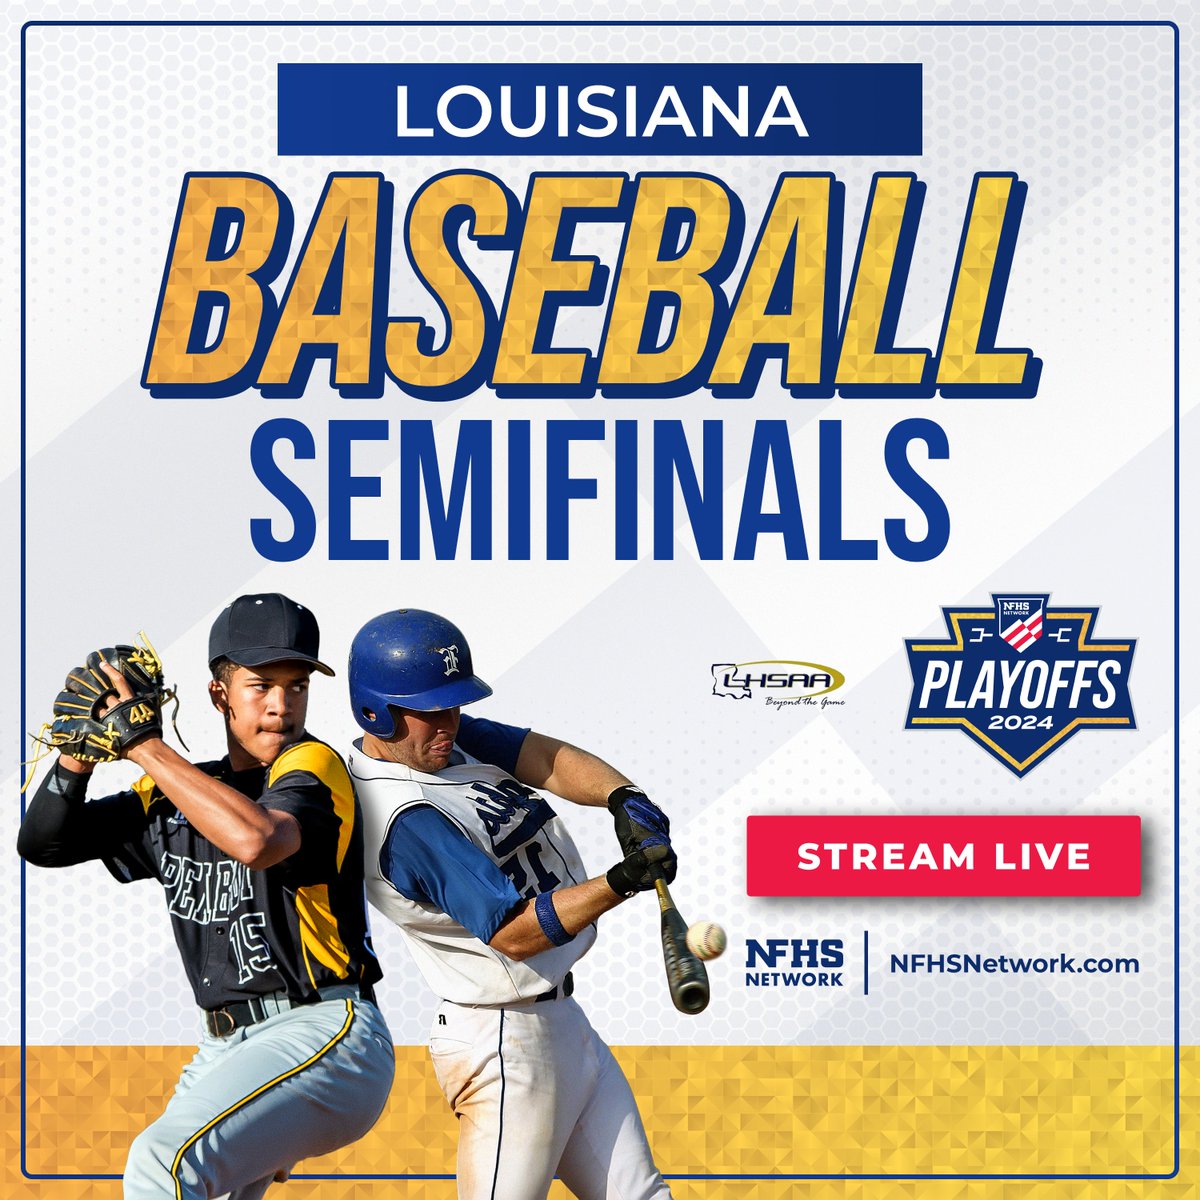 @LHSAAsports Don't miss any of the action from the 2024 LHSAA Baseball Semifinals live on the #NFHSNetwork today! ⚾ Watch live through the OFFICIAL link here: bit.ly/3tVJrNo ✅